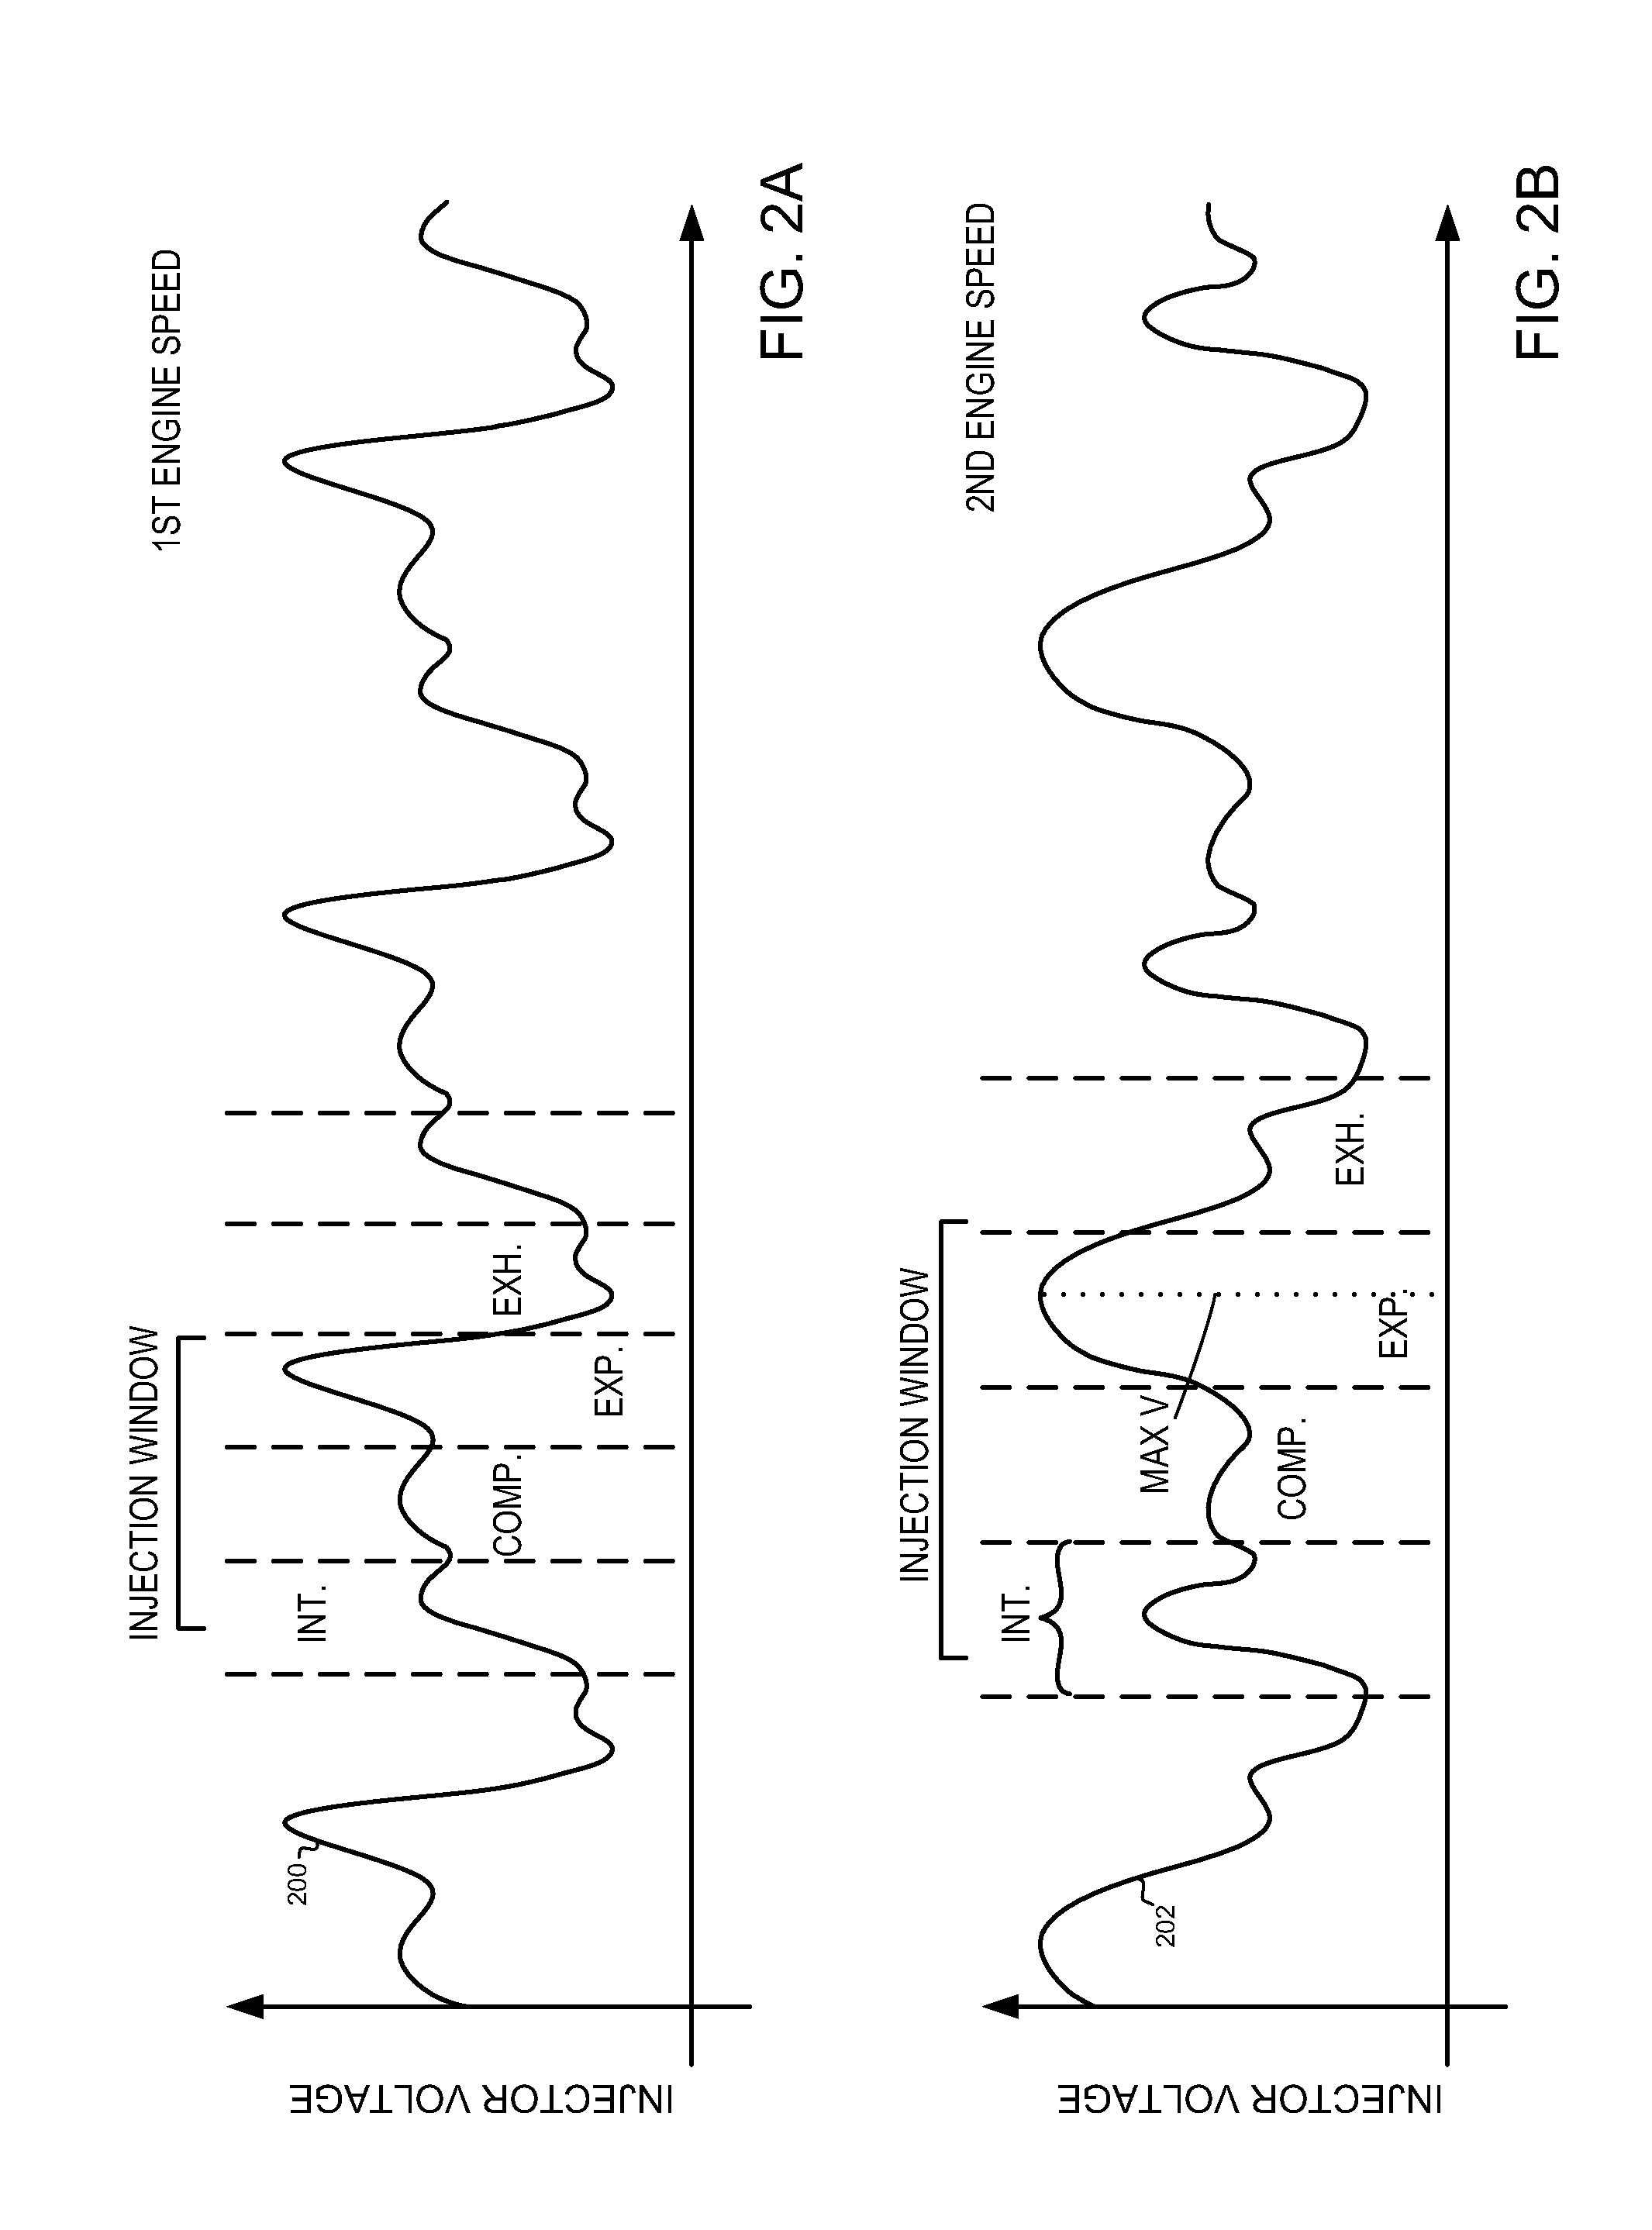 System and method for injecting fuel to a gaseous fueled engine